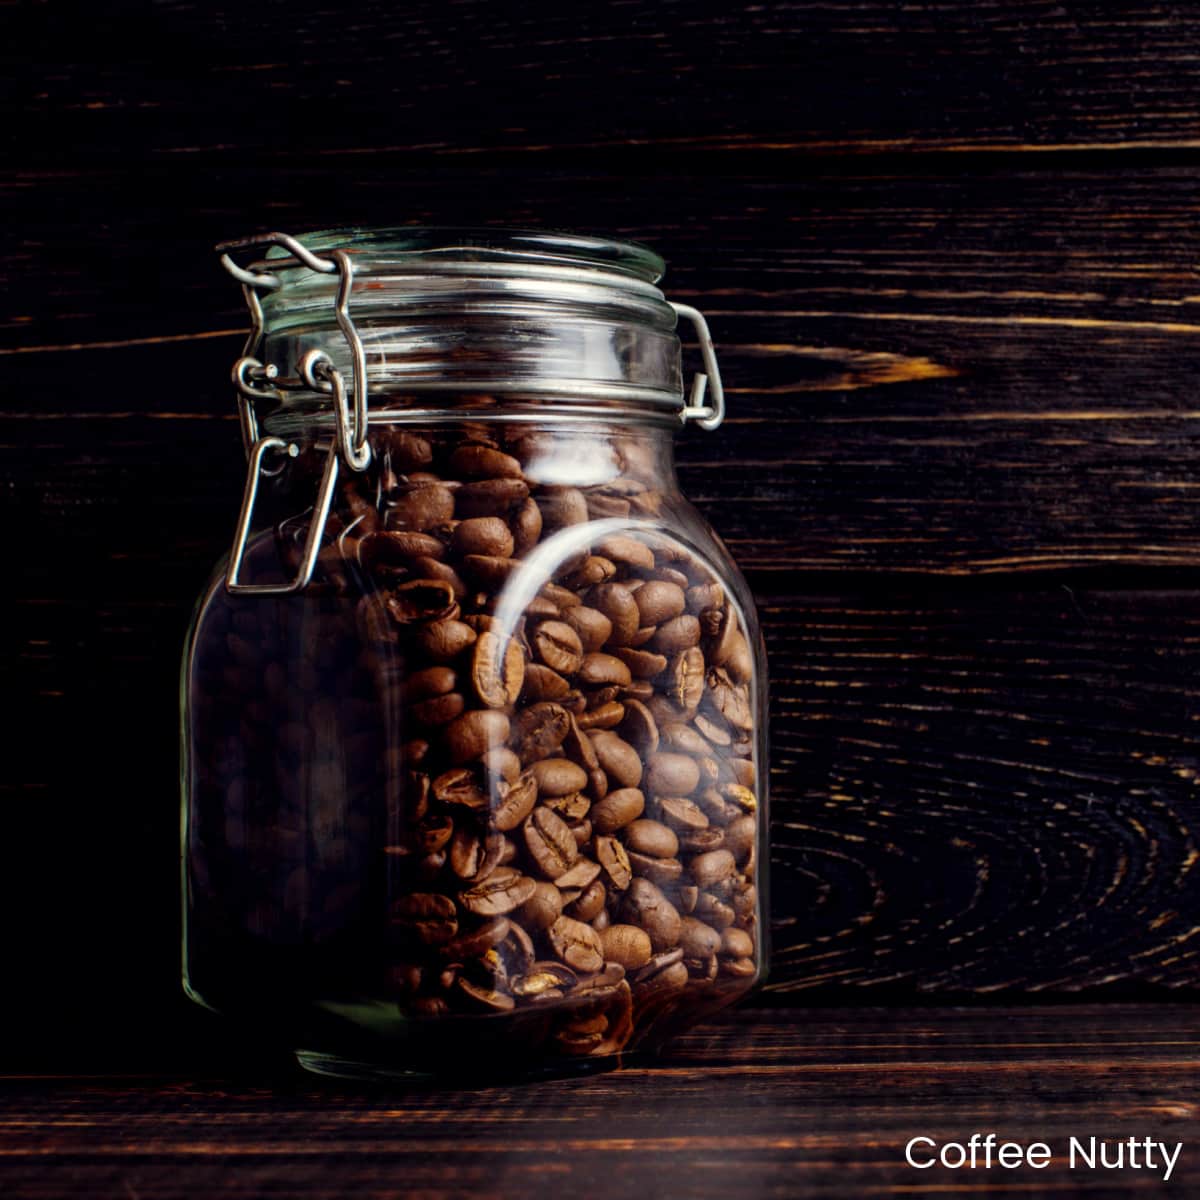 Glass jar of coffee beans with dark background.